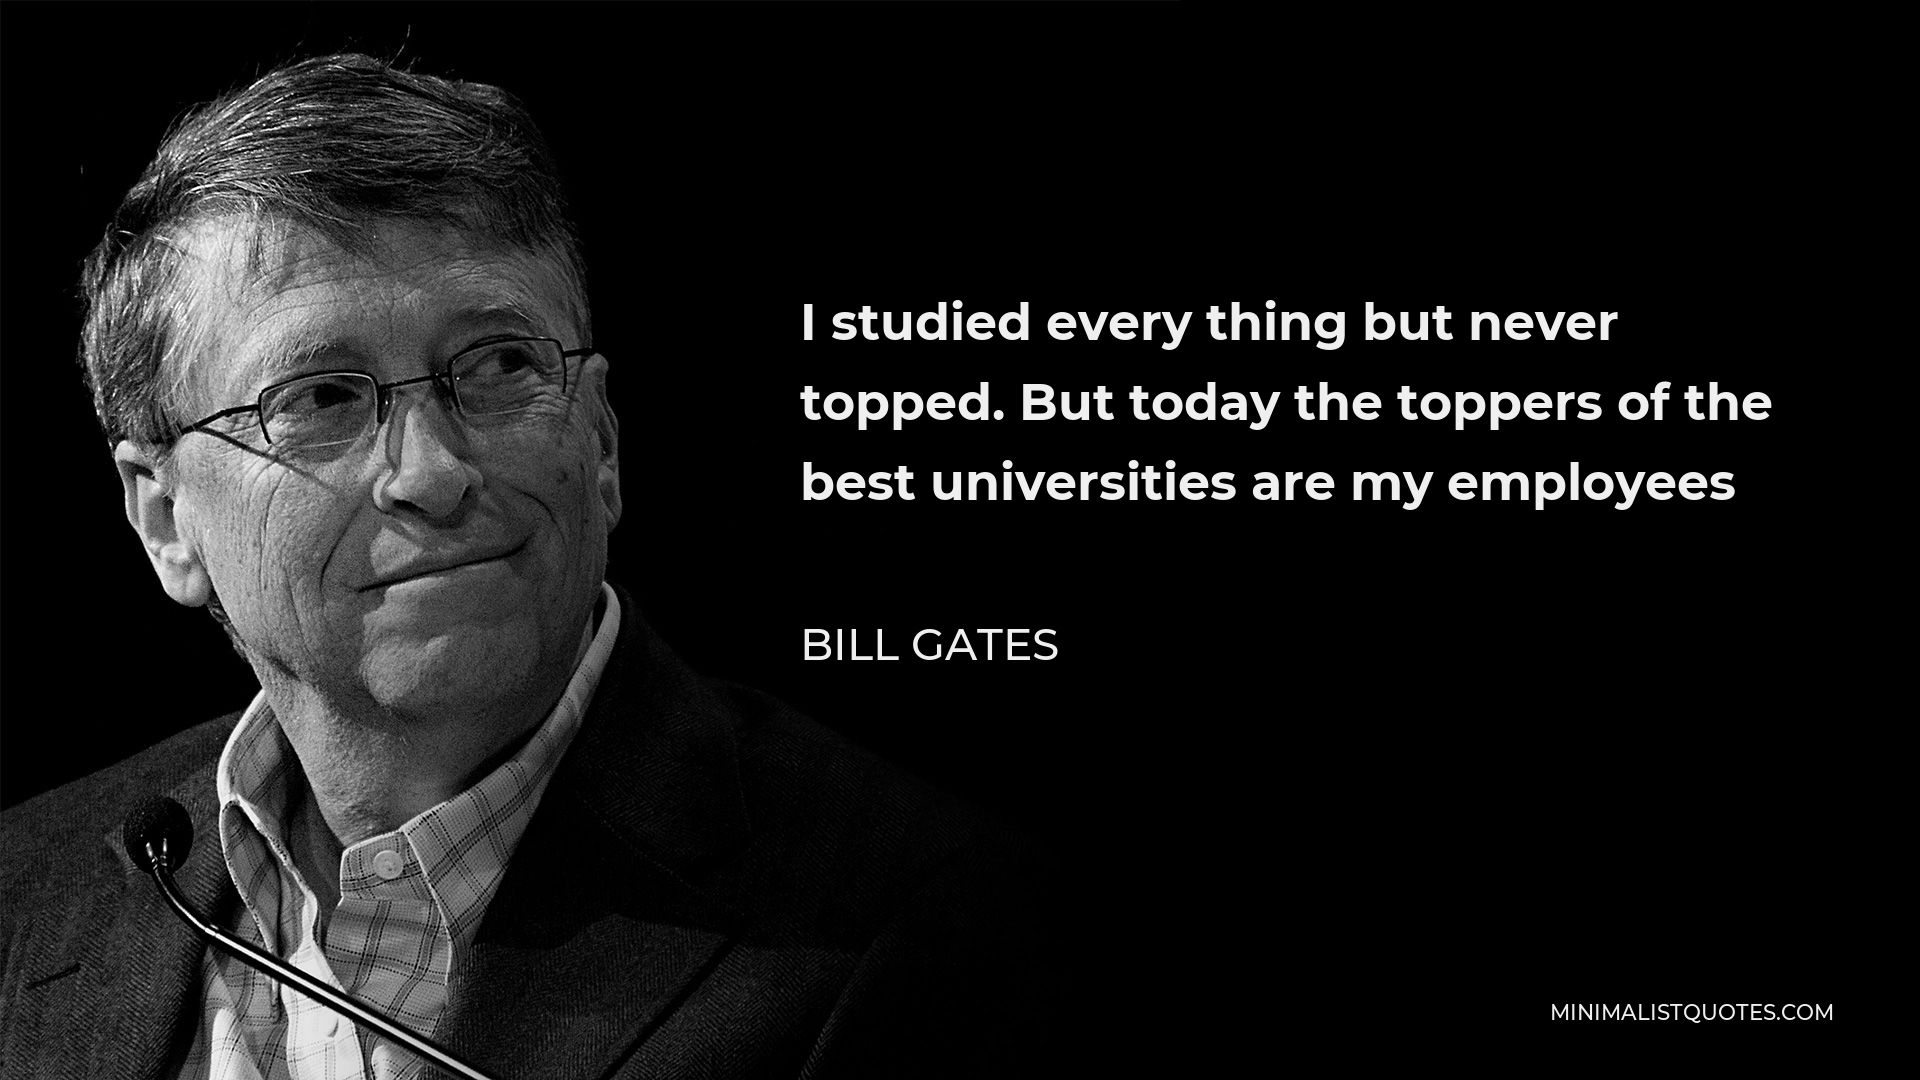 Bill Gates Quote - I studied every thing but never topped. But today the toppers of the best universities are my employees